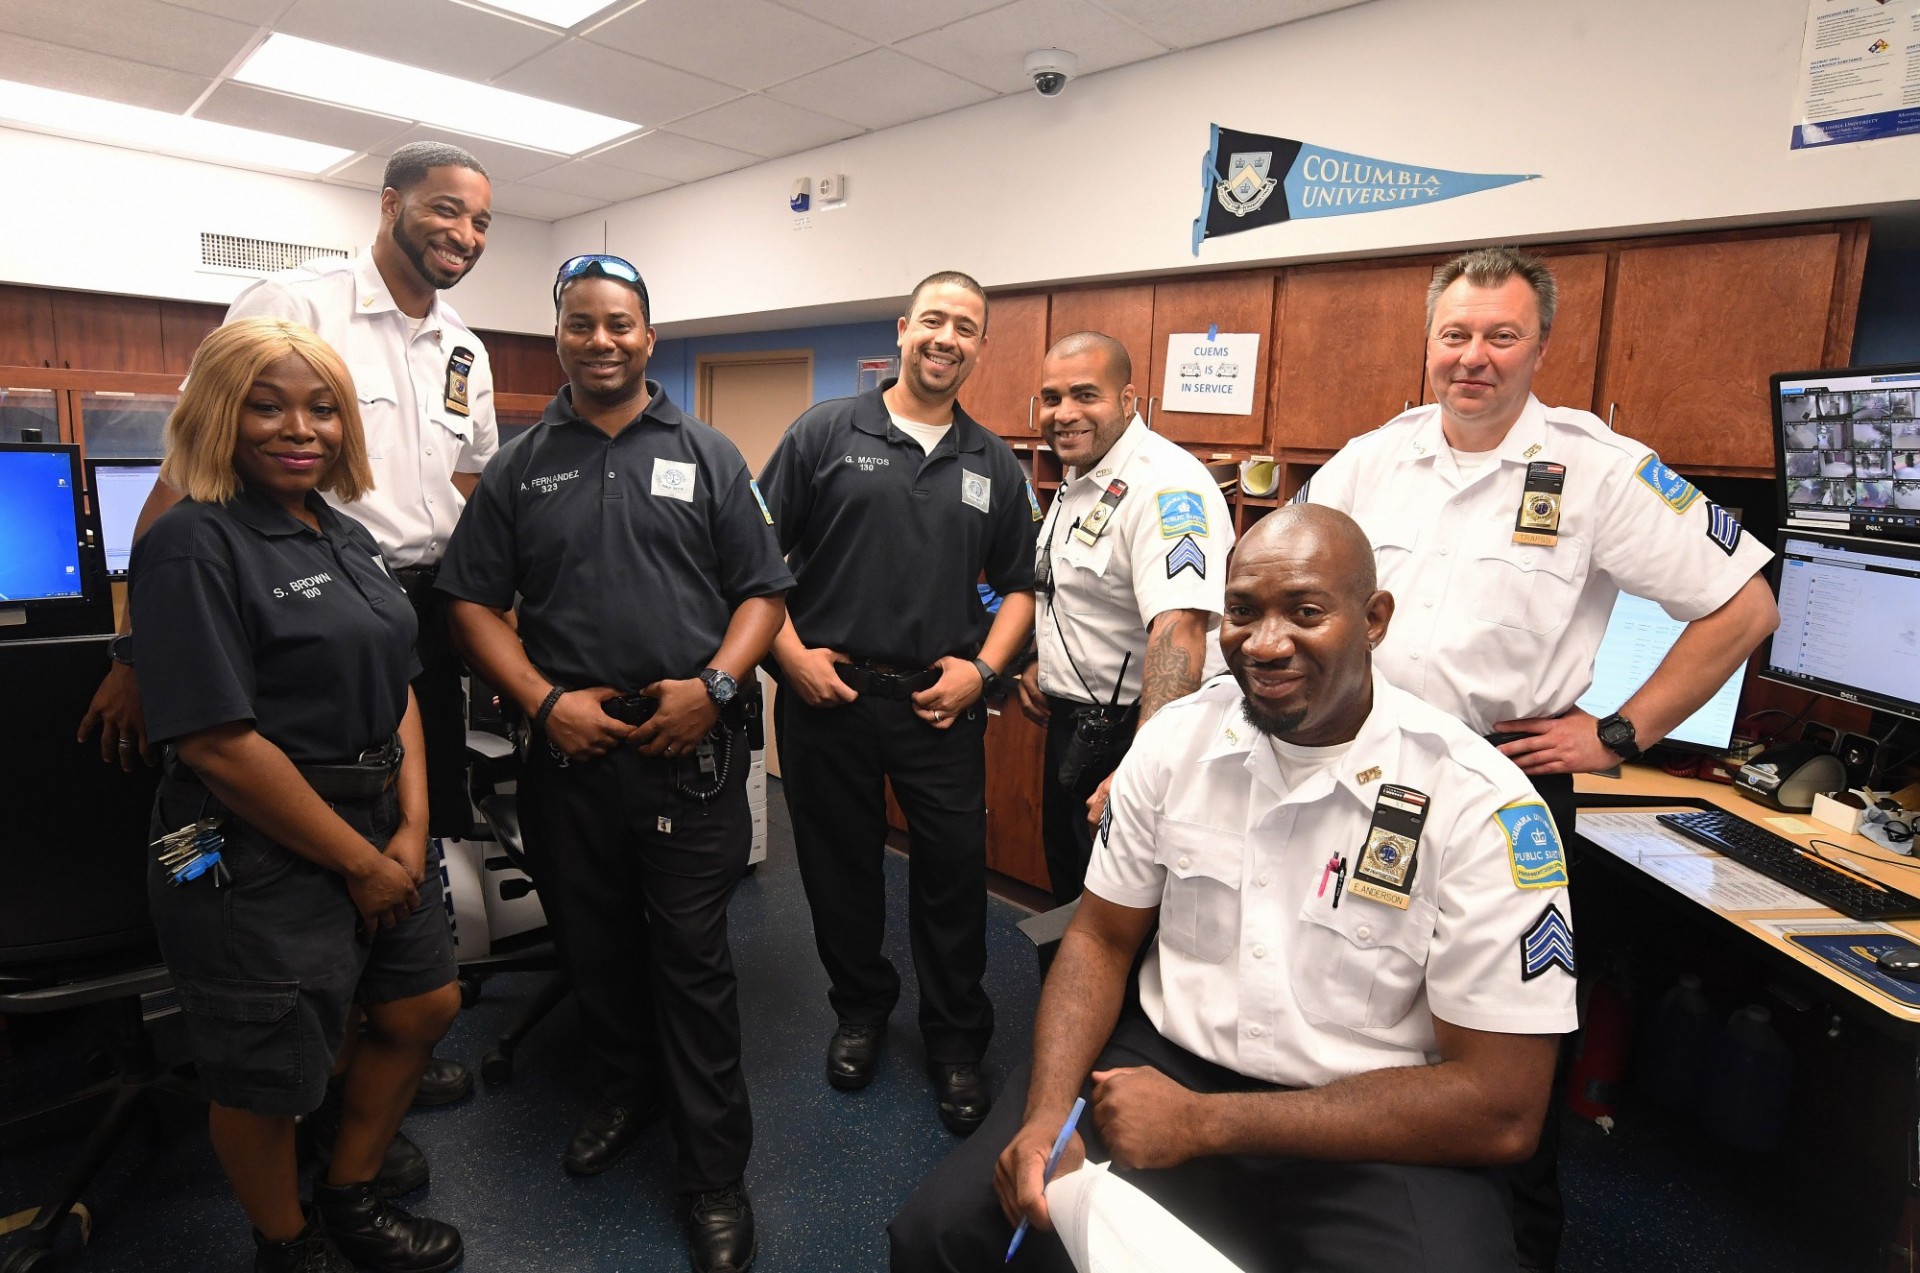 A group of Public Safety officers stand together inside an office.